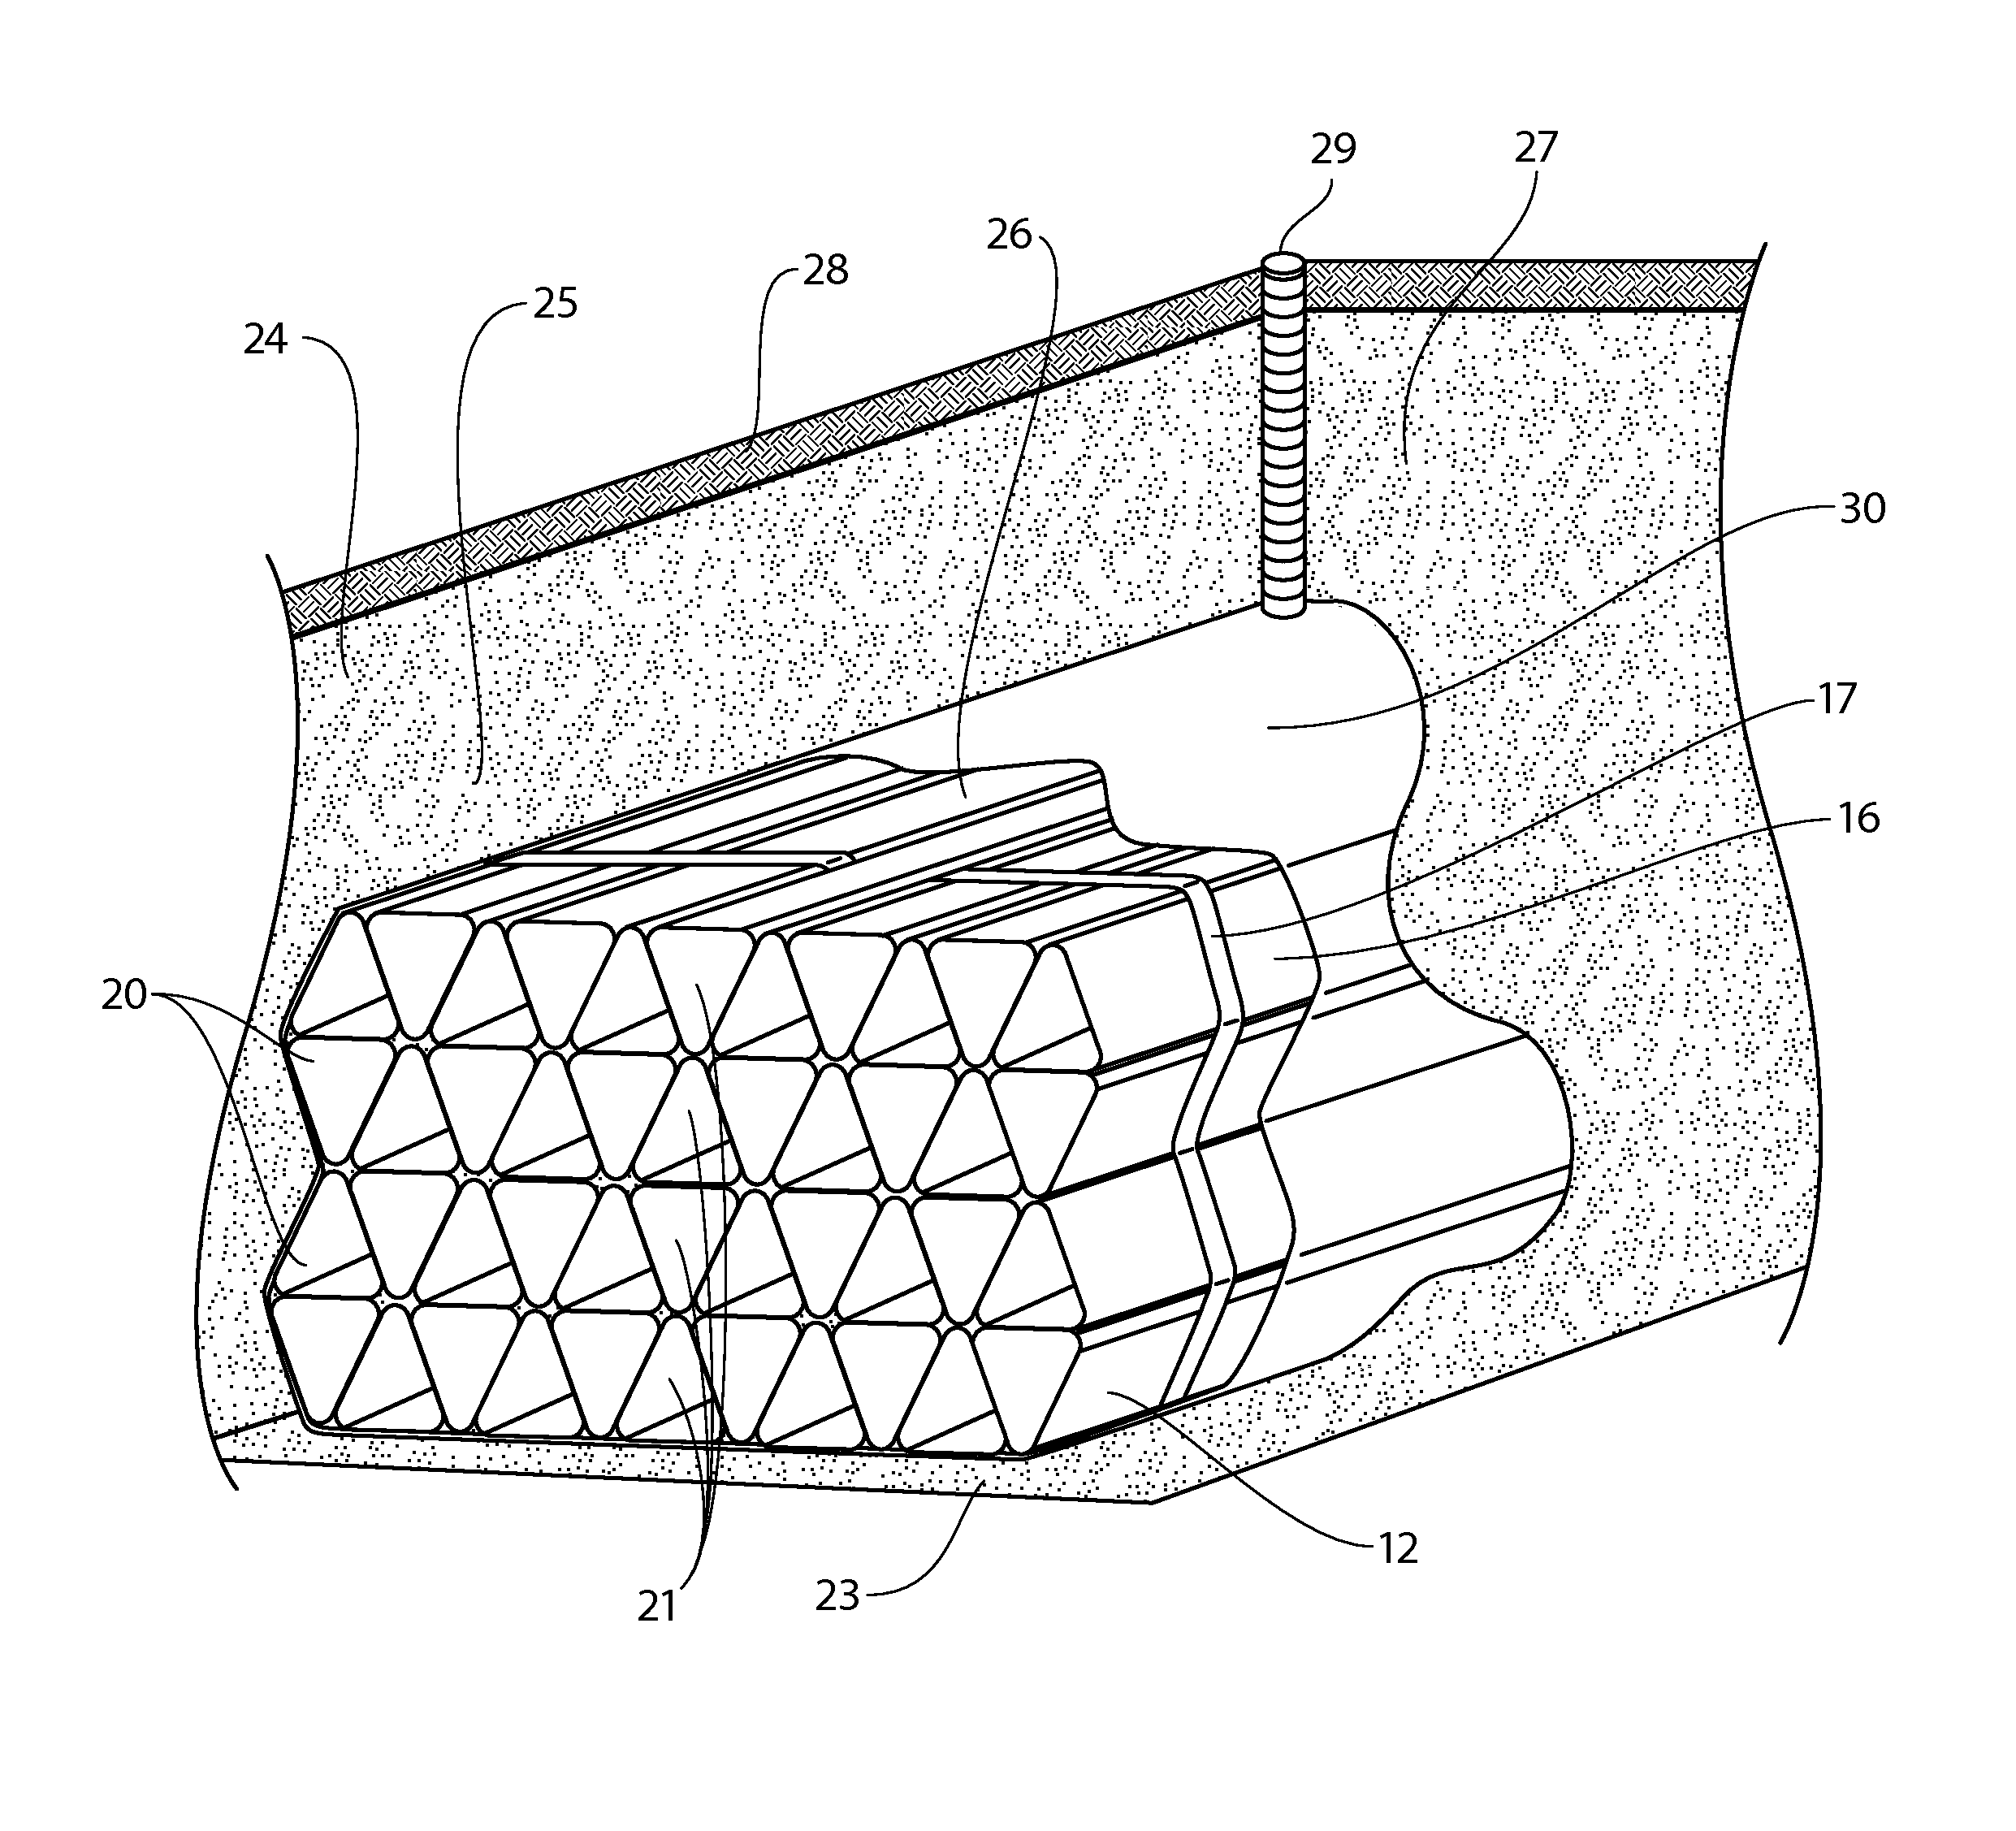 Apparatus and method of supporting underground fluid and water storage and retention systems